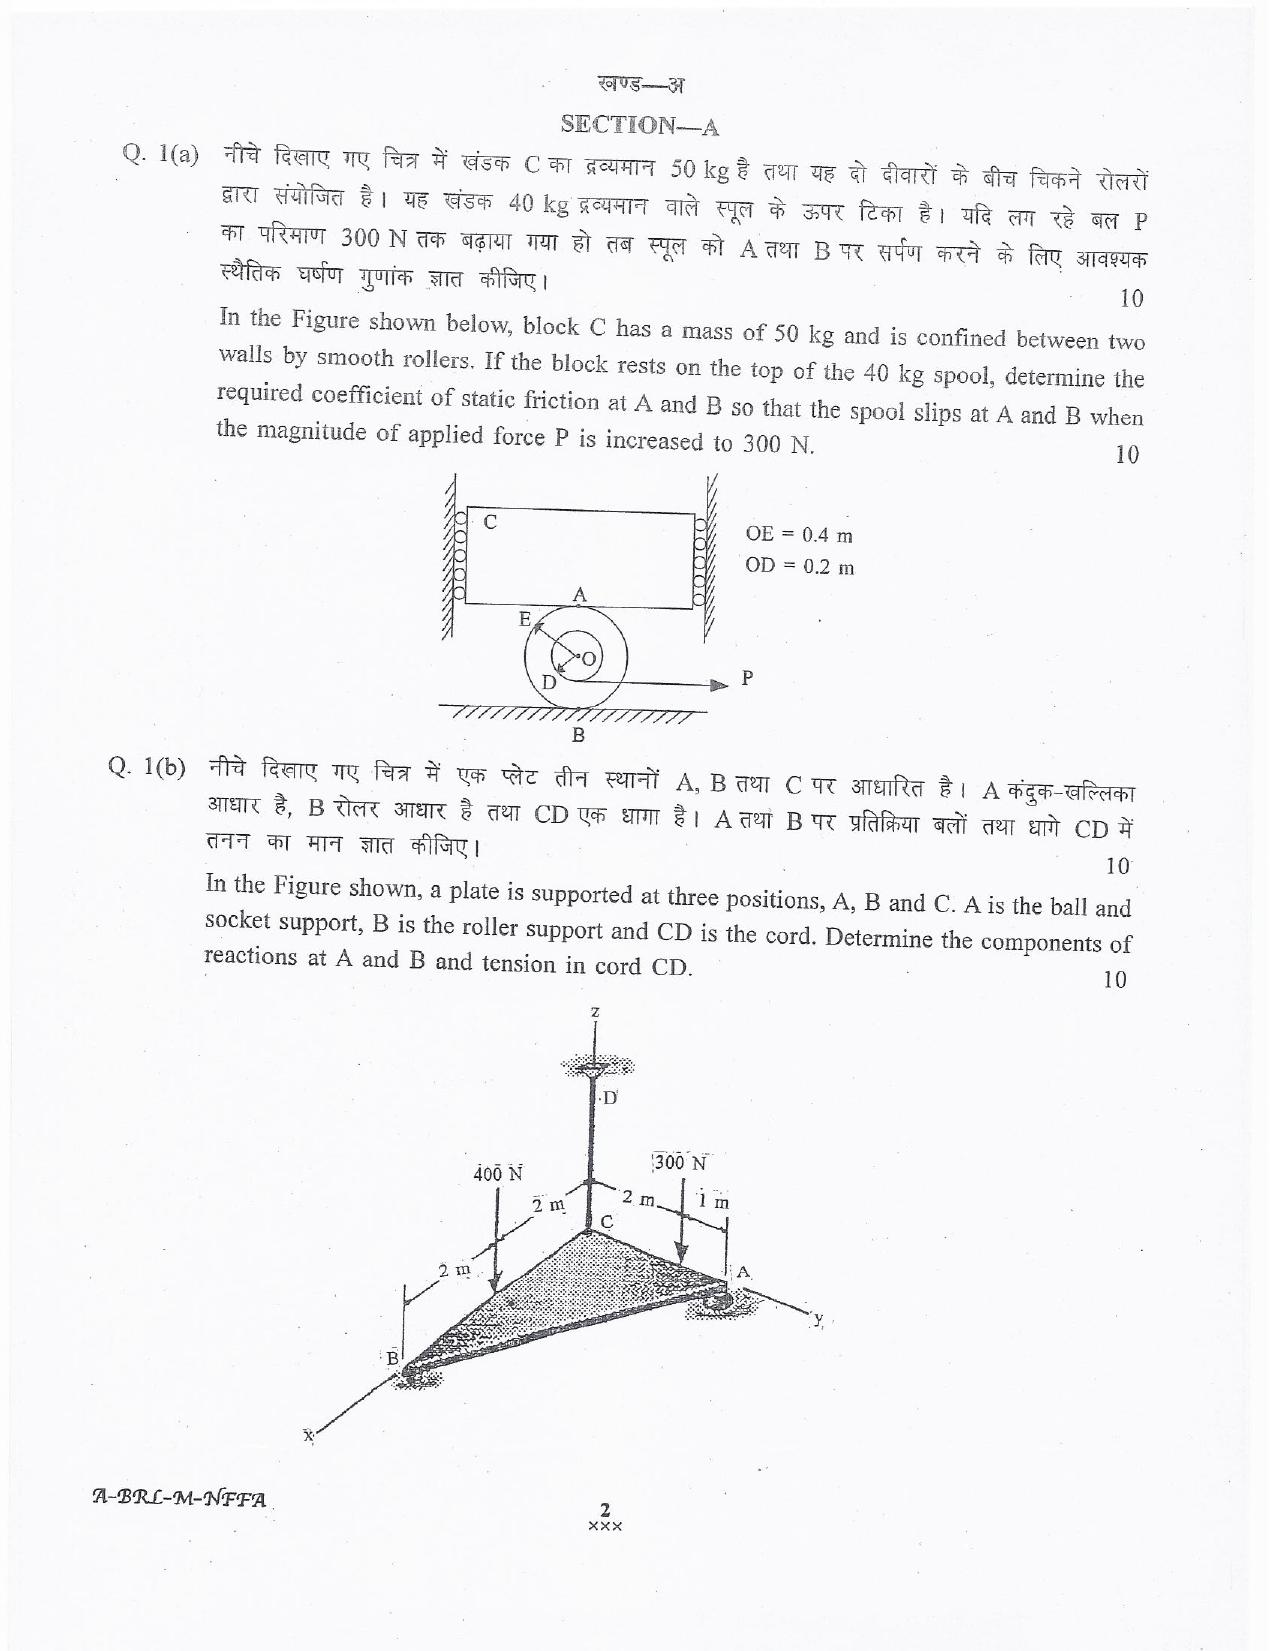 lakshadweep.gov.in Mechanical Engineering Question Papers - Page 2